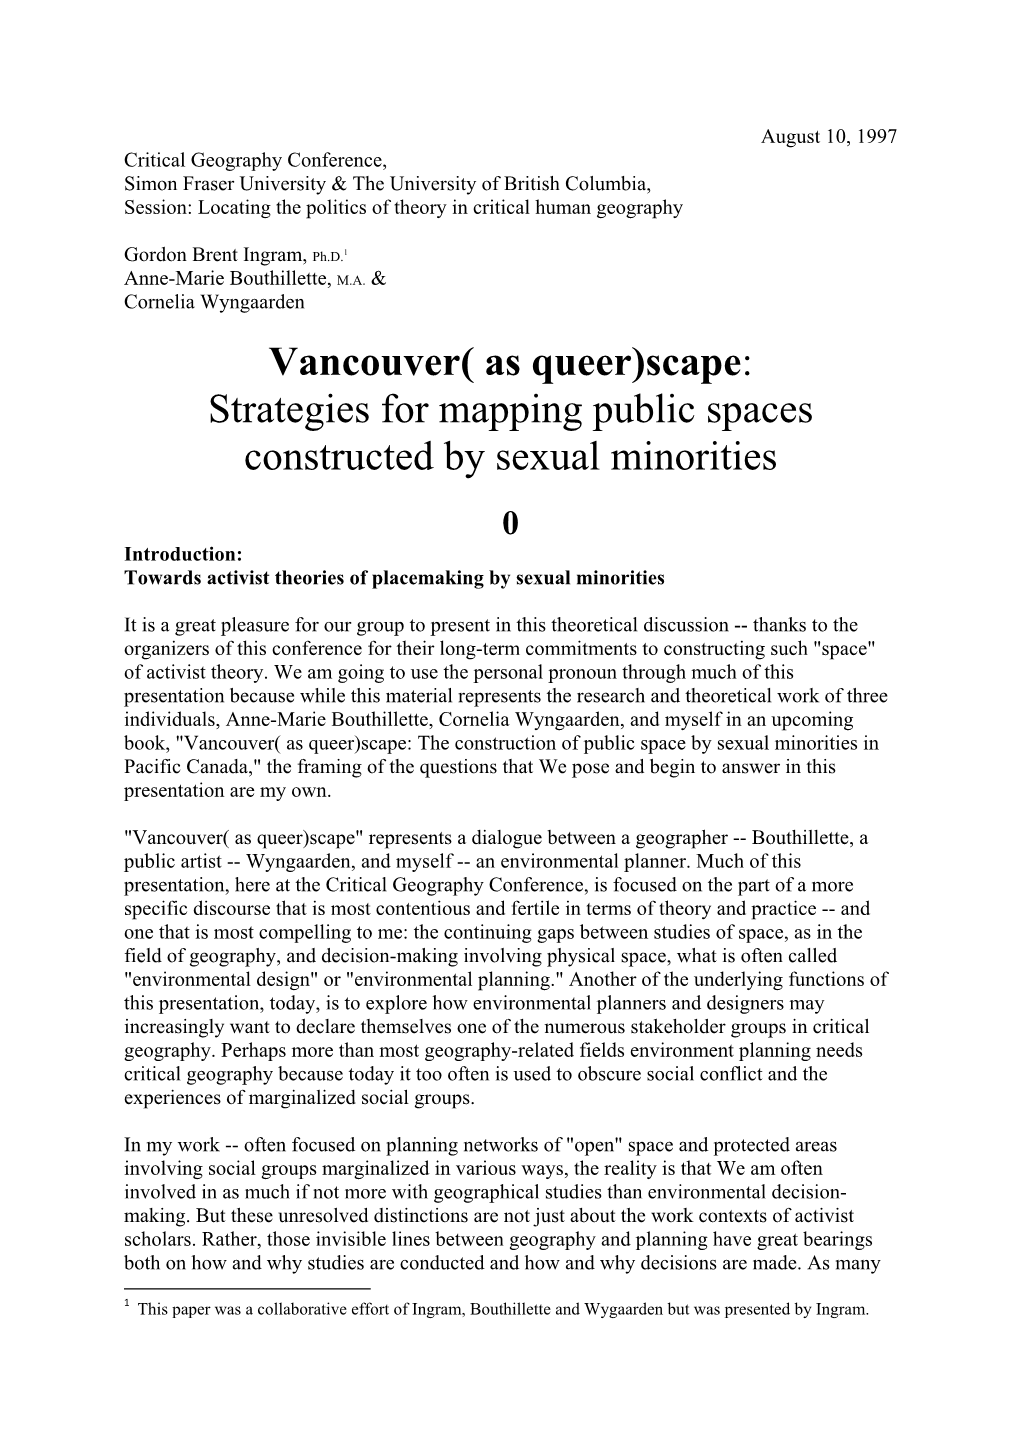 Vancouver( As Queer)Scape: Strategies for Mapping Public Spaces Constructed by Sexual Minorities